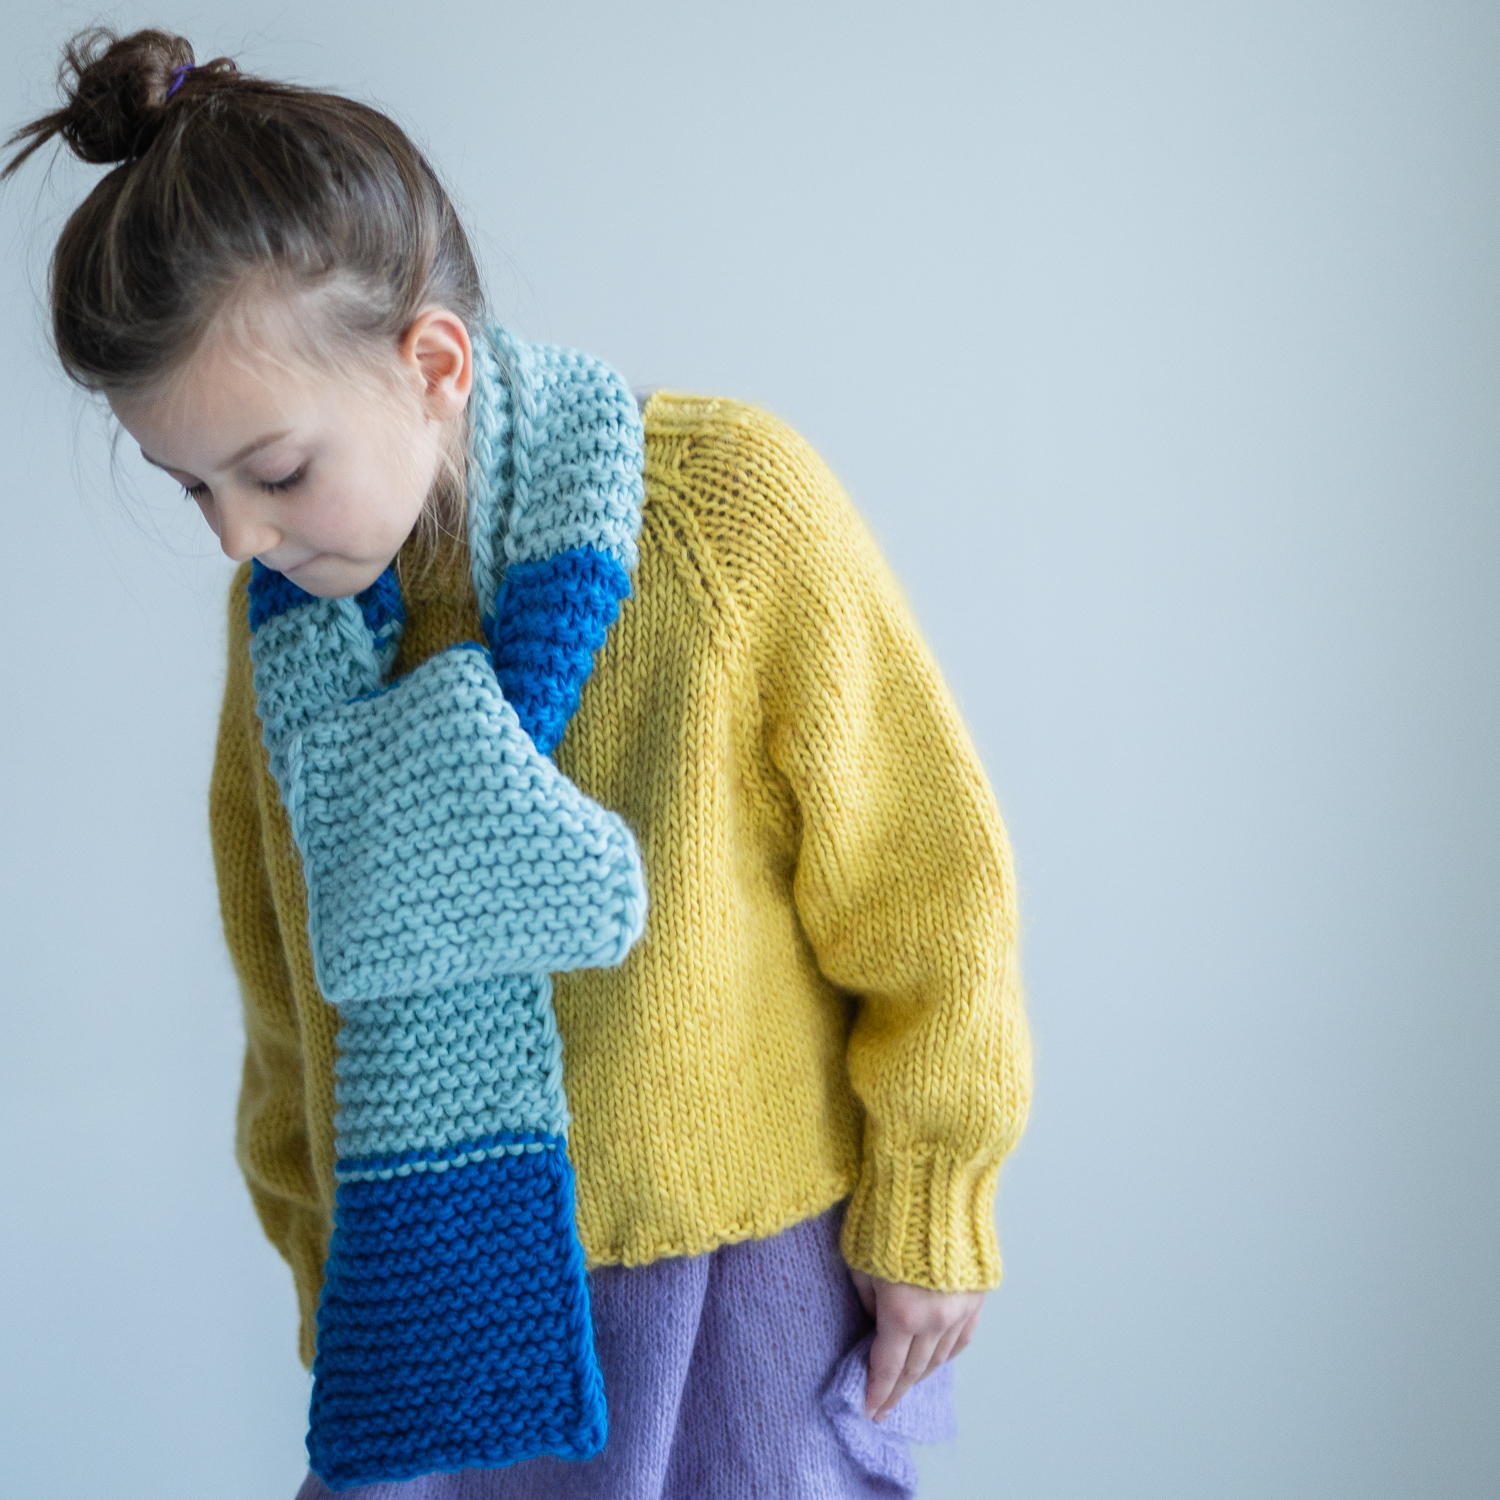  - So Striped scarf | Beginners knit striped scarf knitting kit - by HipKnitShop - 05/12/2018